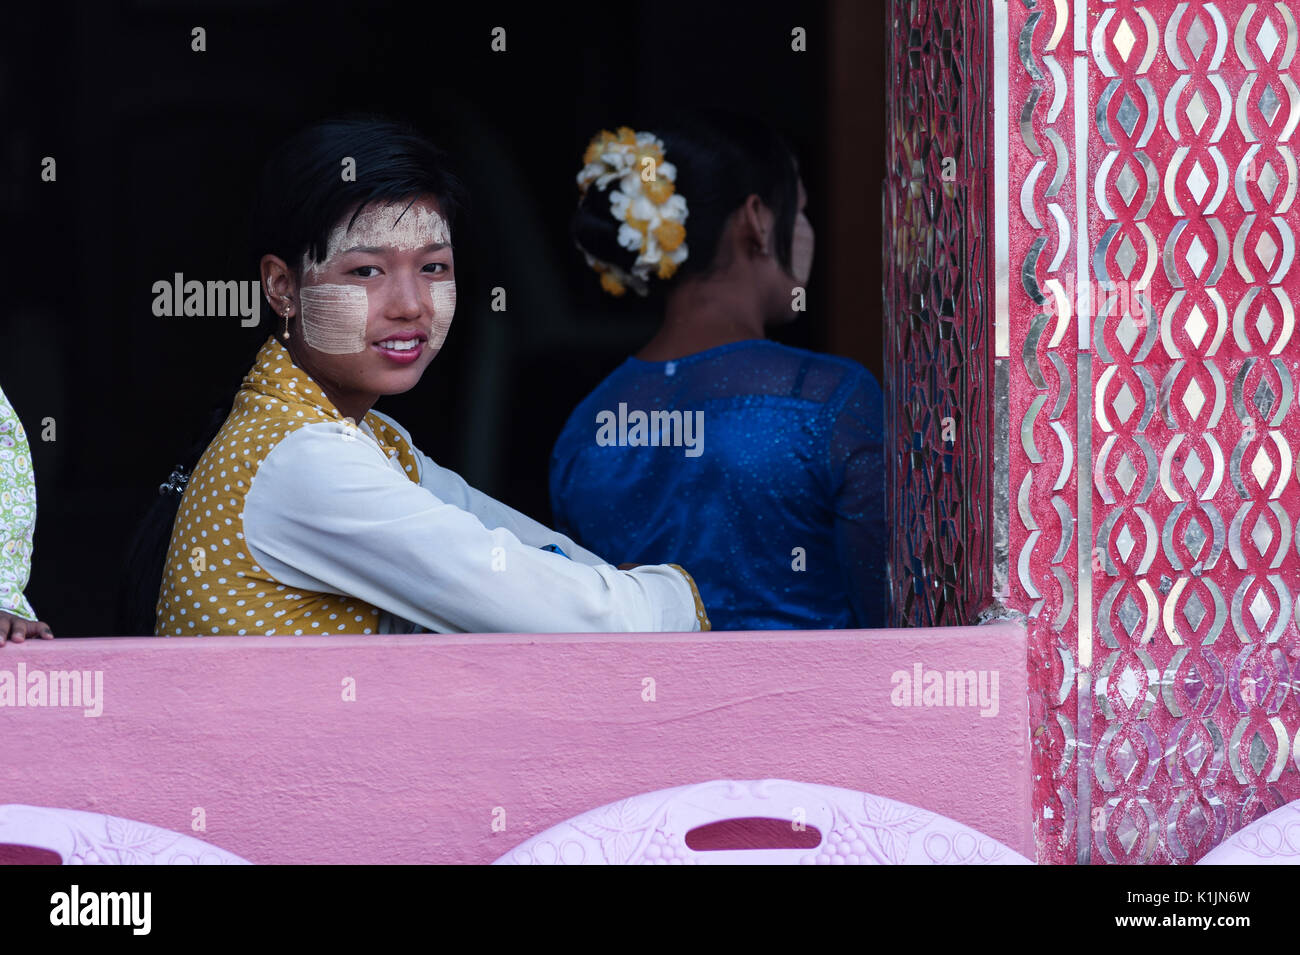 A young girl with thanaka-painted face attends religious festivities at Taung Min Gyi Pagoda, Amarapura, Myanmar. Stock Photo